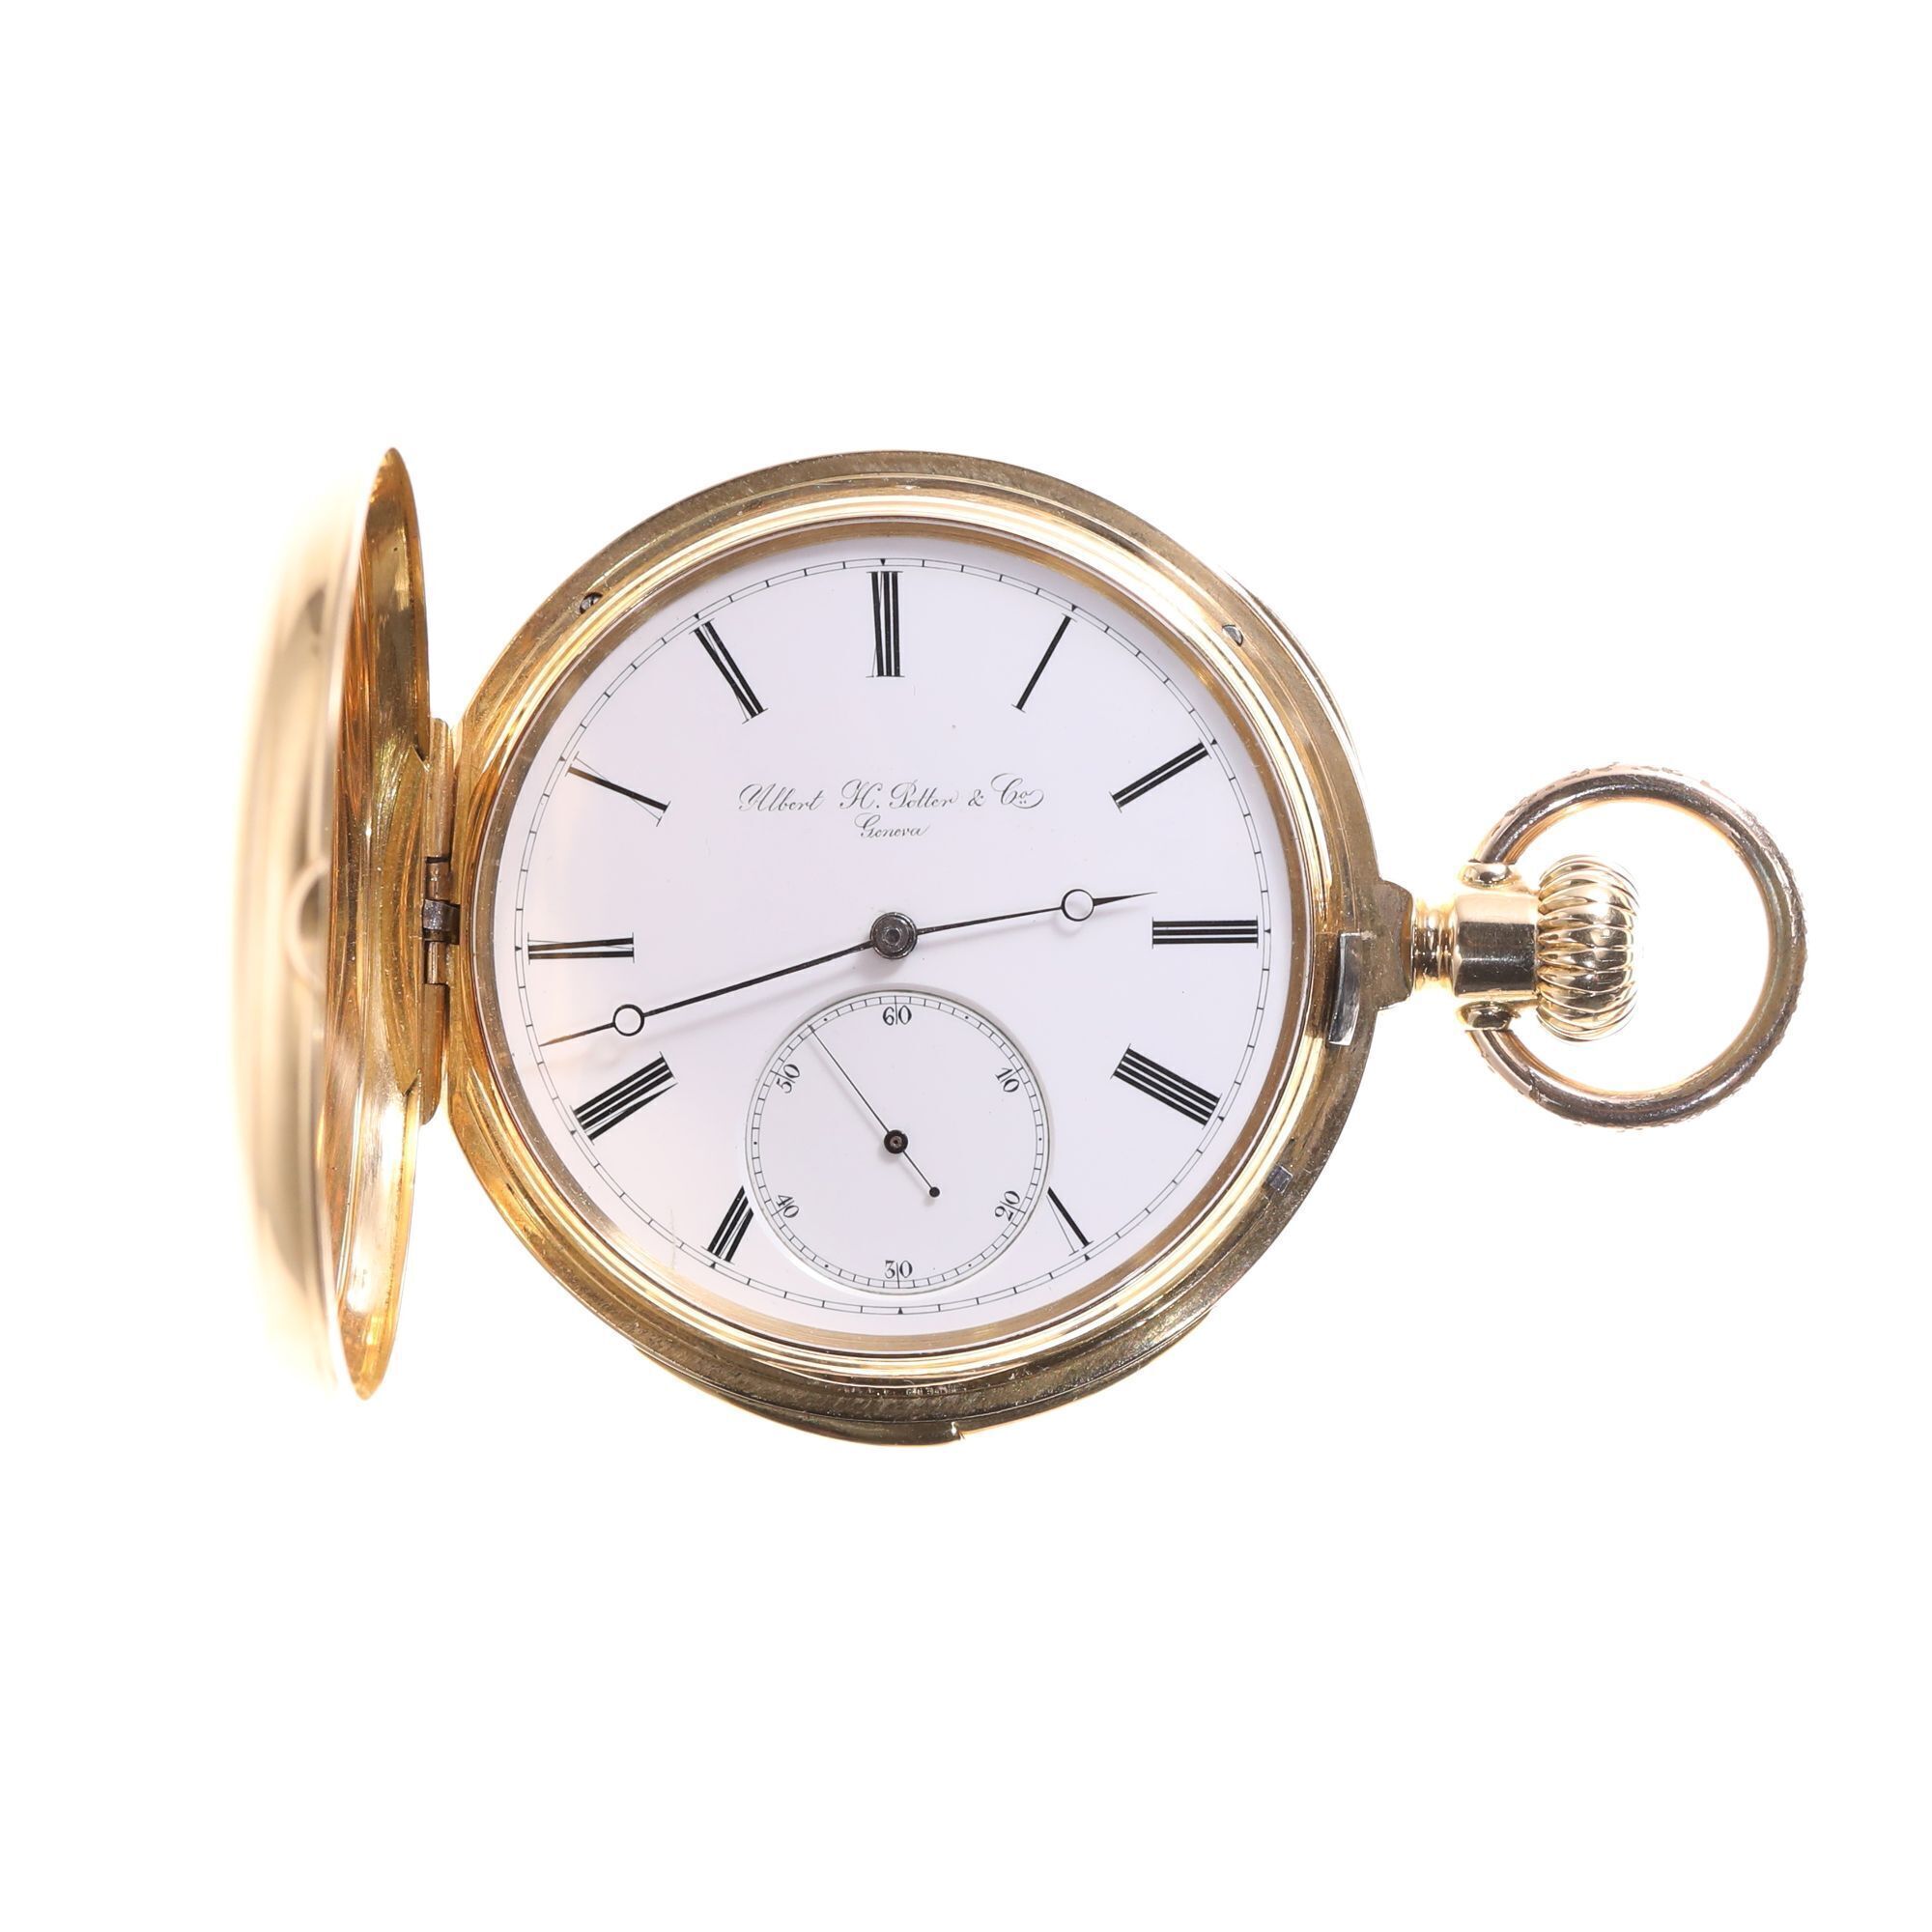 ALBERT H. POTTER MINUTE REPEATER HUNTING CASE POCKET WATCH